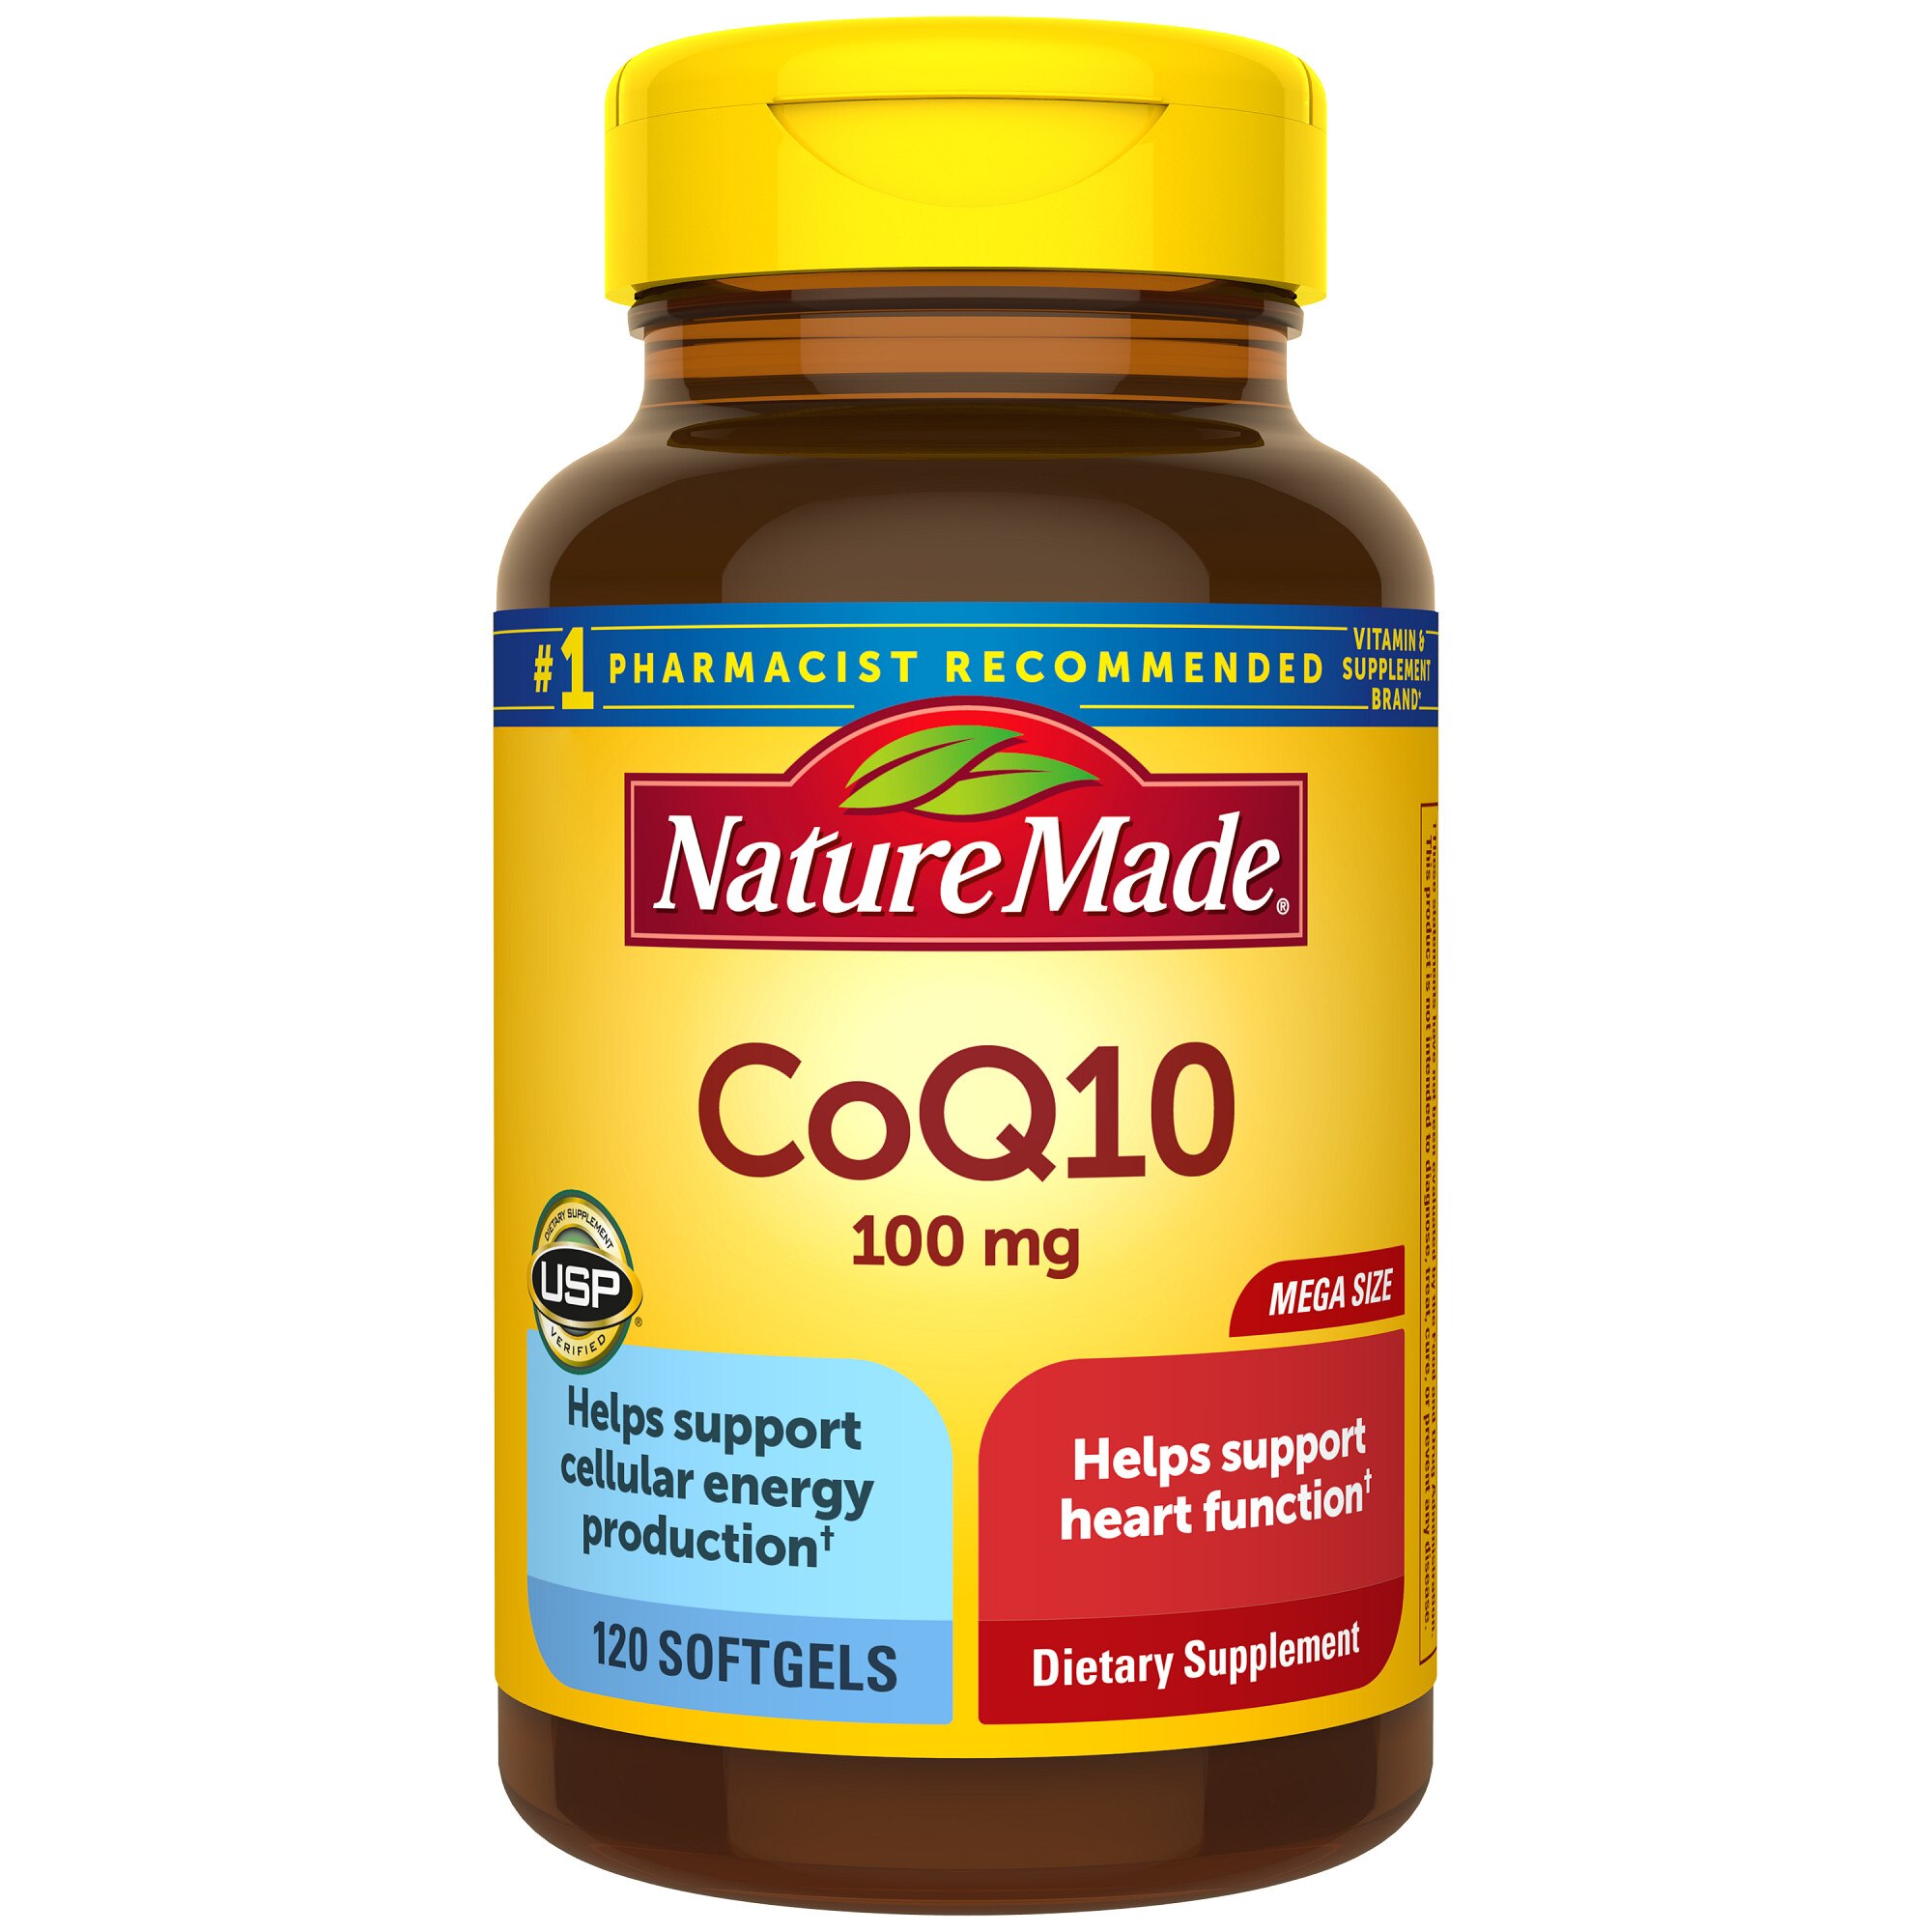 Nature Made CoQ10 100 mg Heart Health Support Softgels, 120 CT